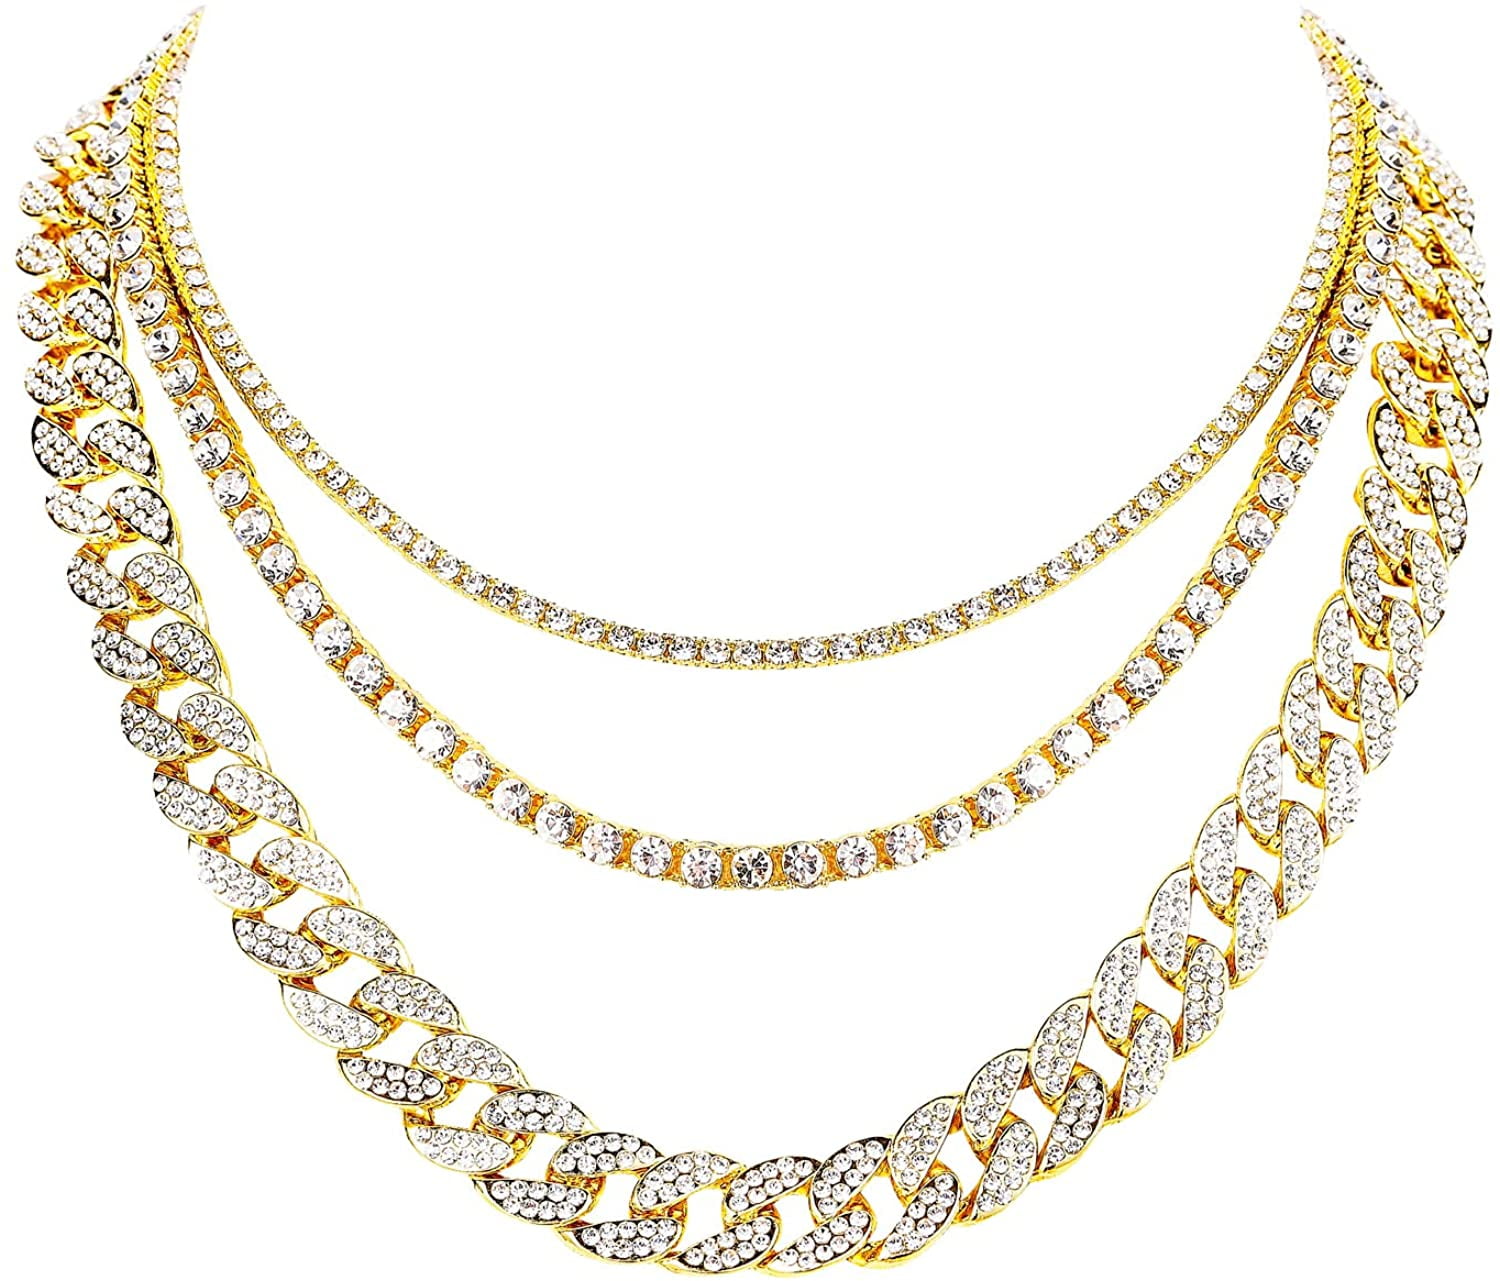 HH Bling Empire Iced Out Diamond Cuban Link Chain for Men and Women,Silver  or Gold Miami Cuban Necklaces Hip Hop,Chunky Chains 16-30 Inches (Red-24)  